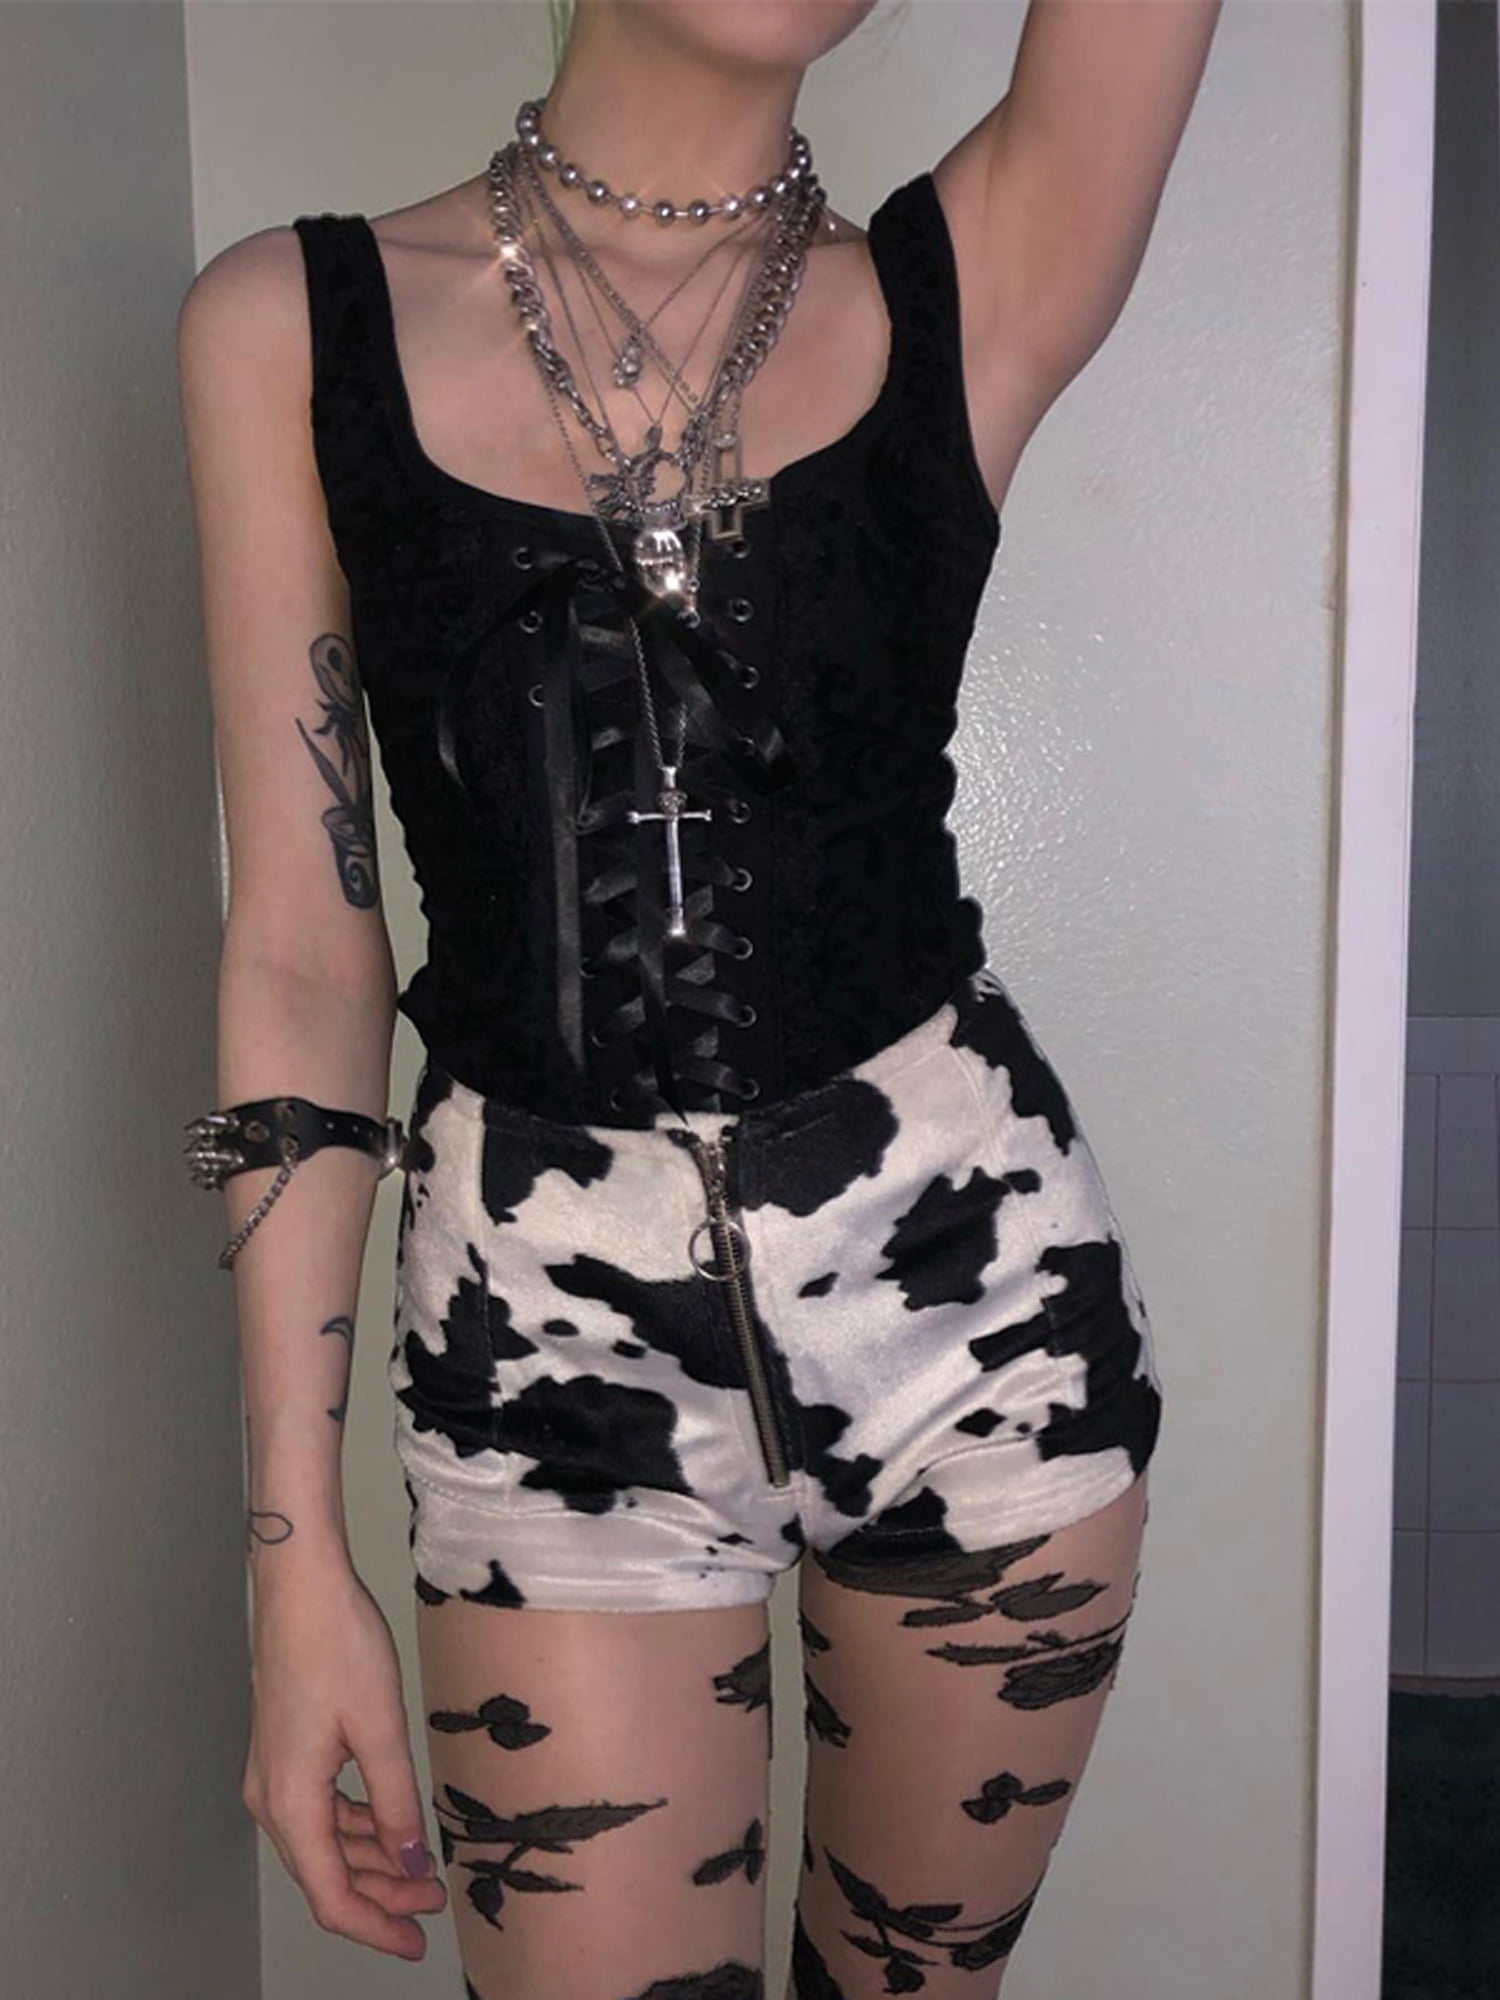 TFFR Harajuku Gothic Grunge Lace Up Corset Top Vintage Bustier Cami Top  Women Black Mini Vest Fairy Grunge Aesthetic Clothing 